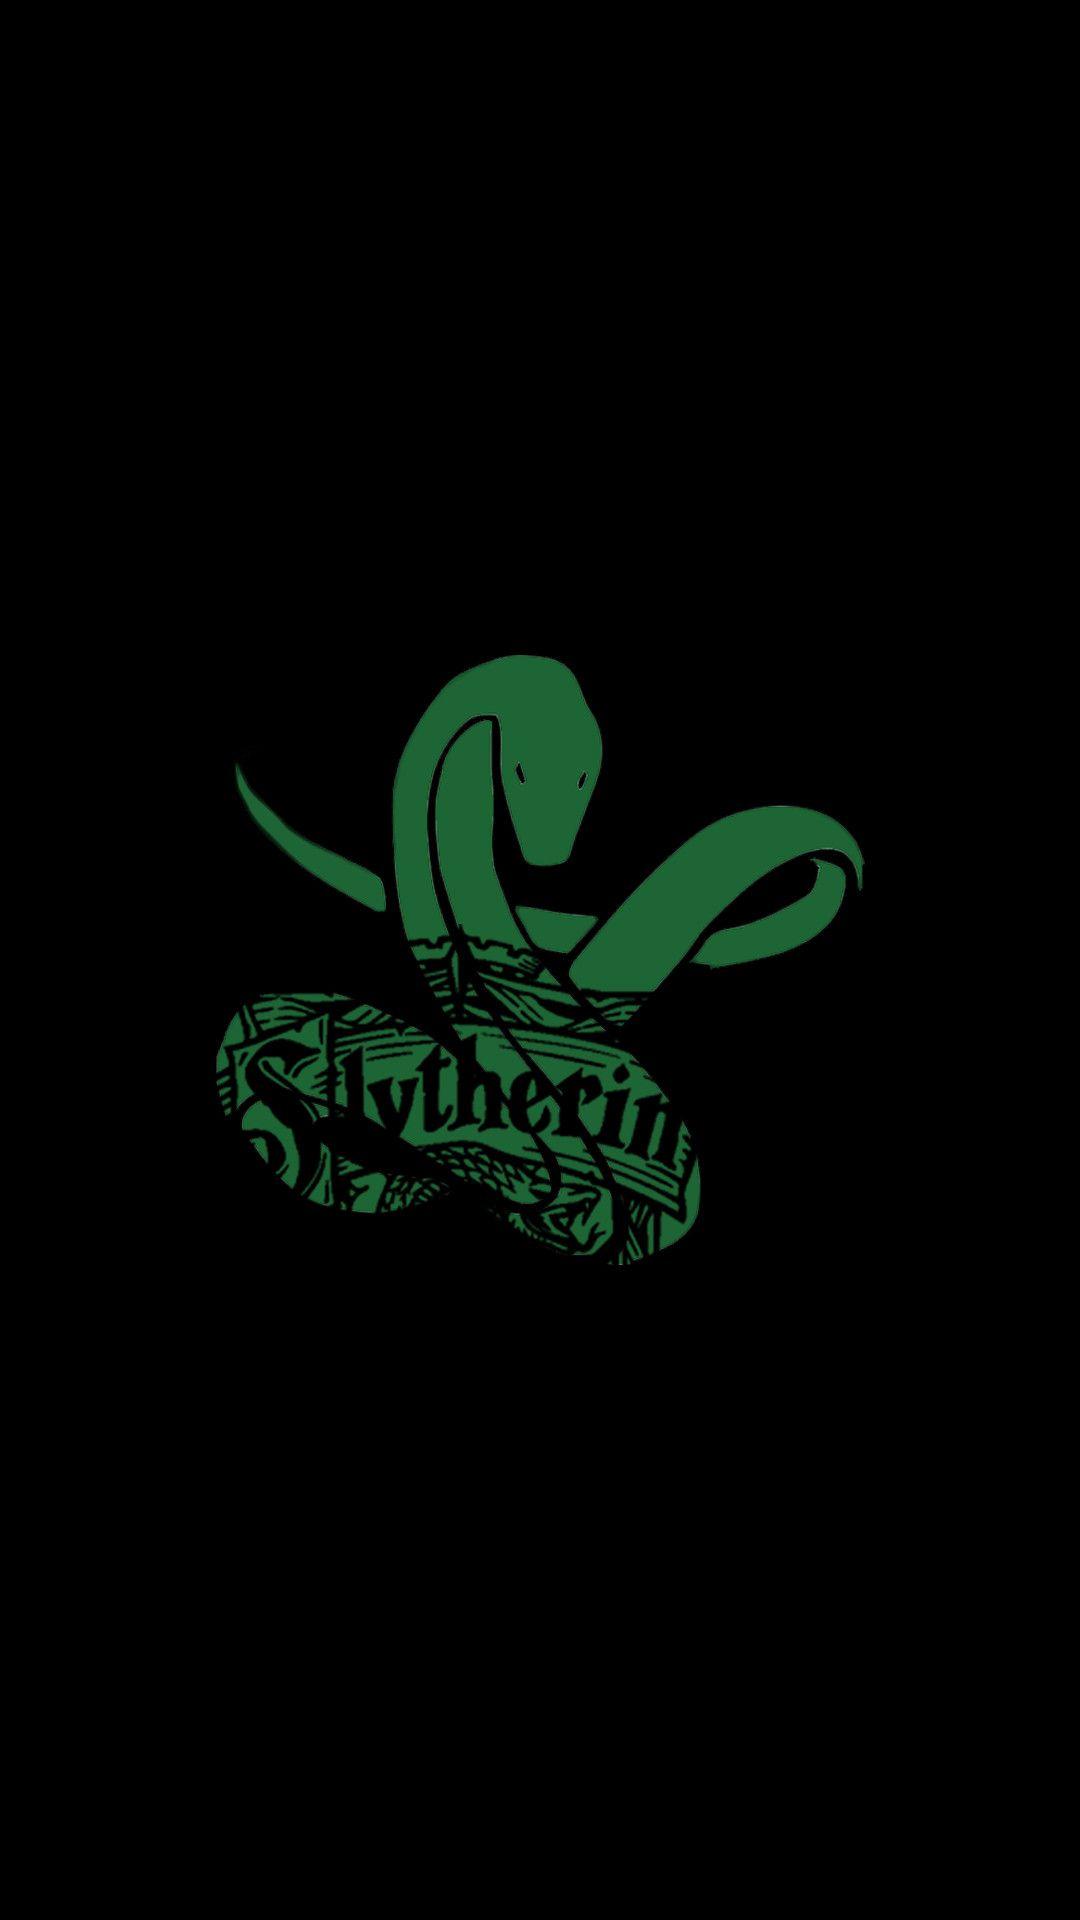 Slytherin iPhone Wallpaper Slytherin iPhone Wallpaper 39 Image